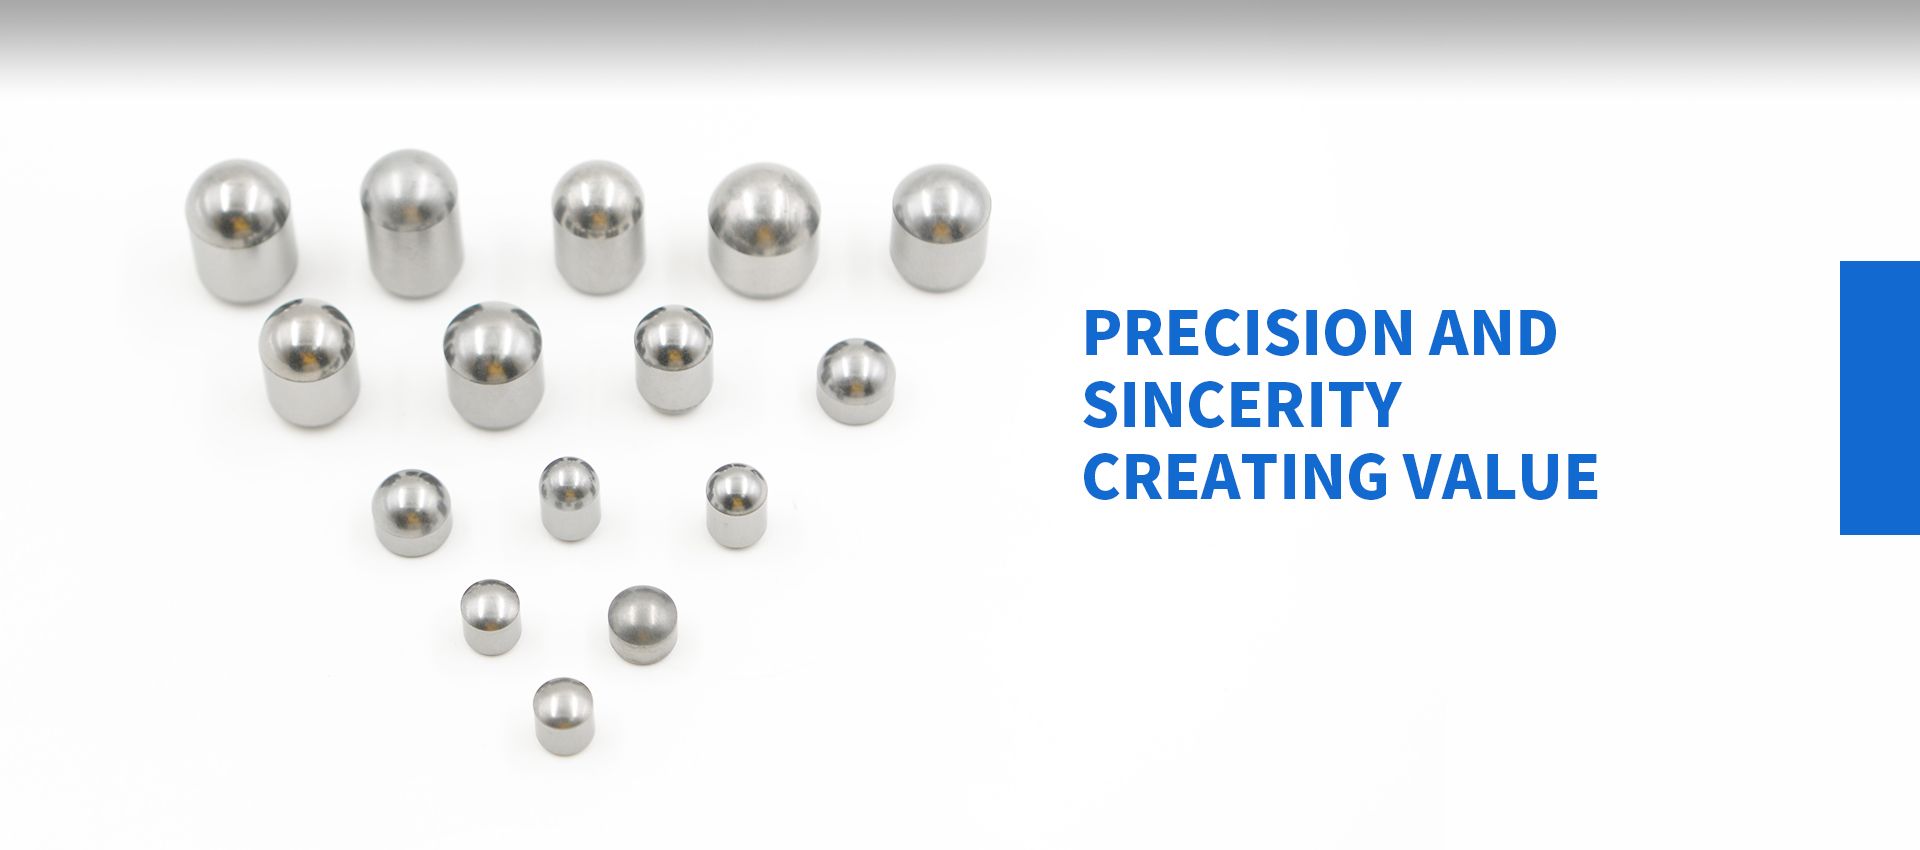 Precision and Sincerity Creating Value